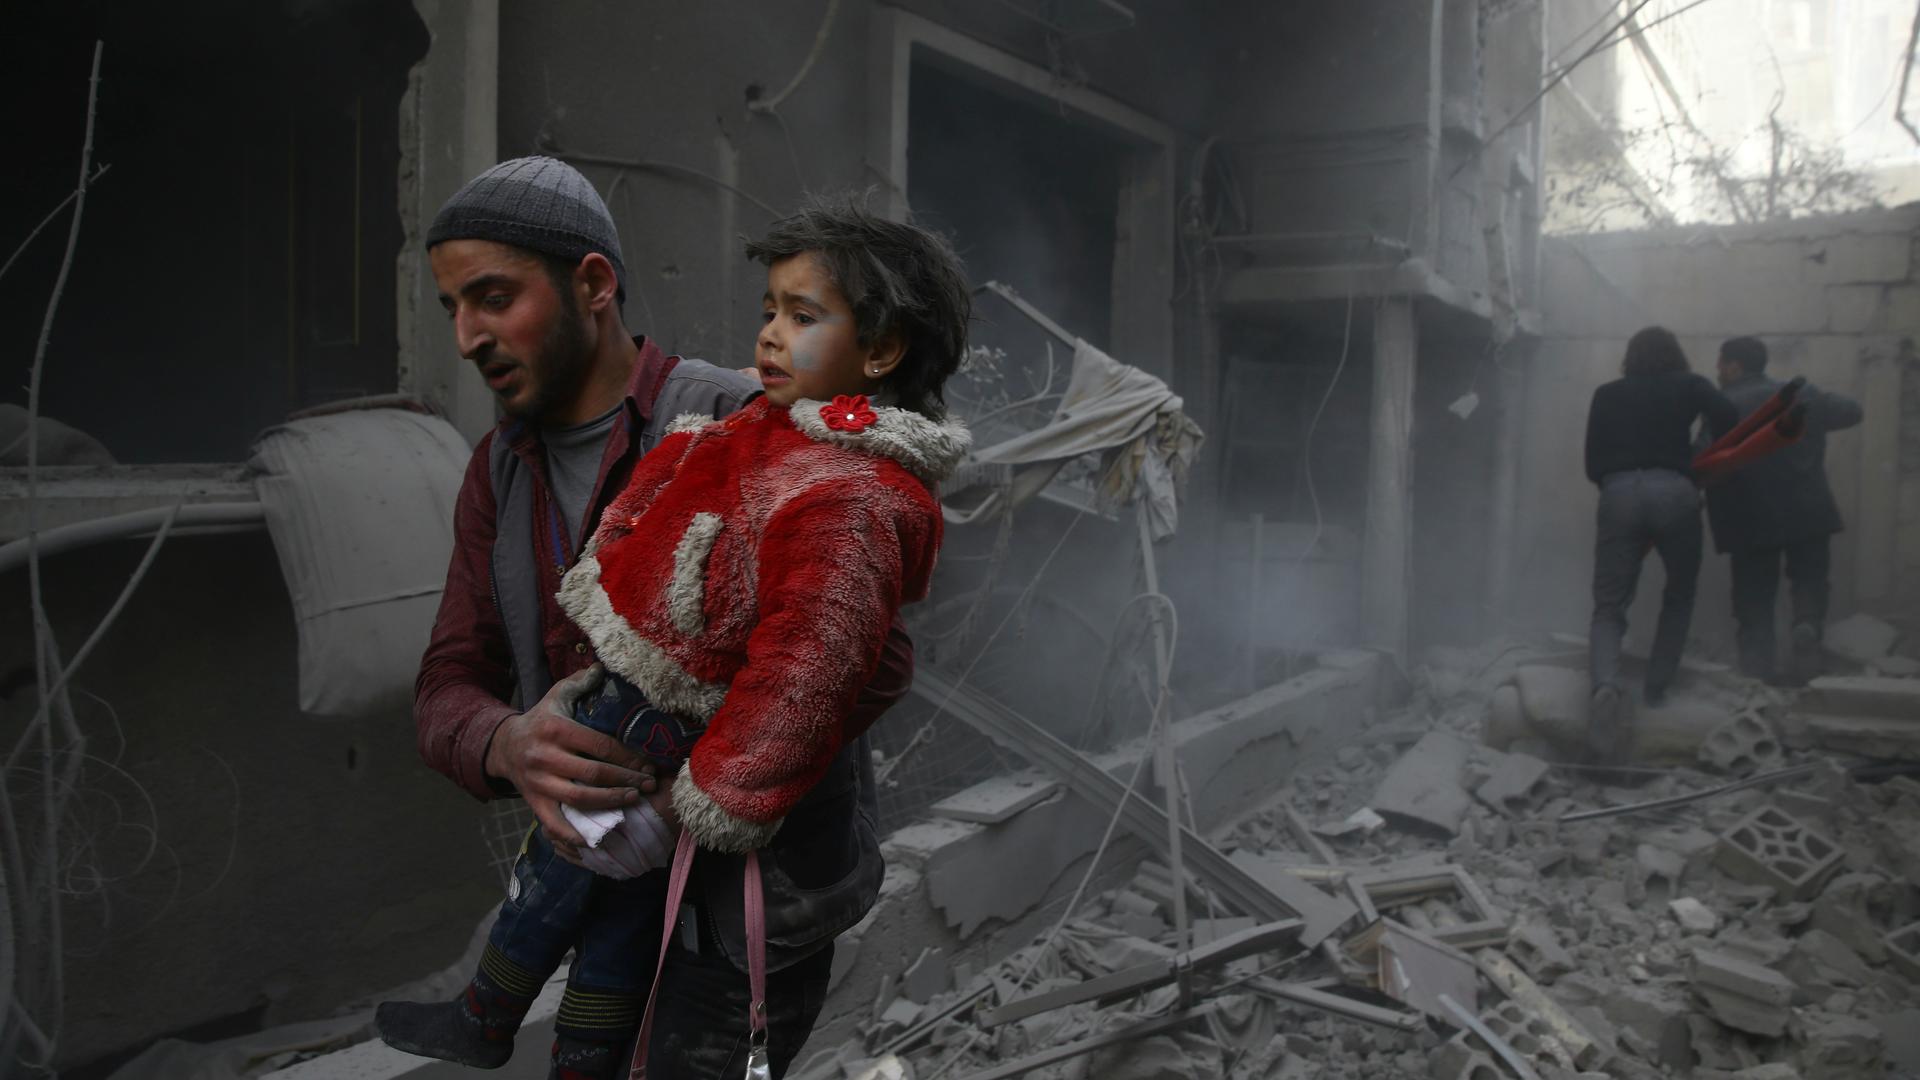 A man holds a child after an airstrike in eastern Ghouta, Syria, Feb. 7, 2018. In the Damascus suburb, besieged by government forces since 2013, about 78 civilians were killed by airstrikes and artillery fire on Tuesday, according to monitors. A further 2